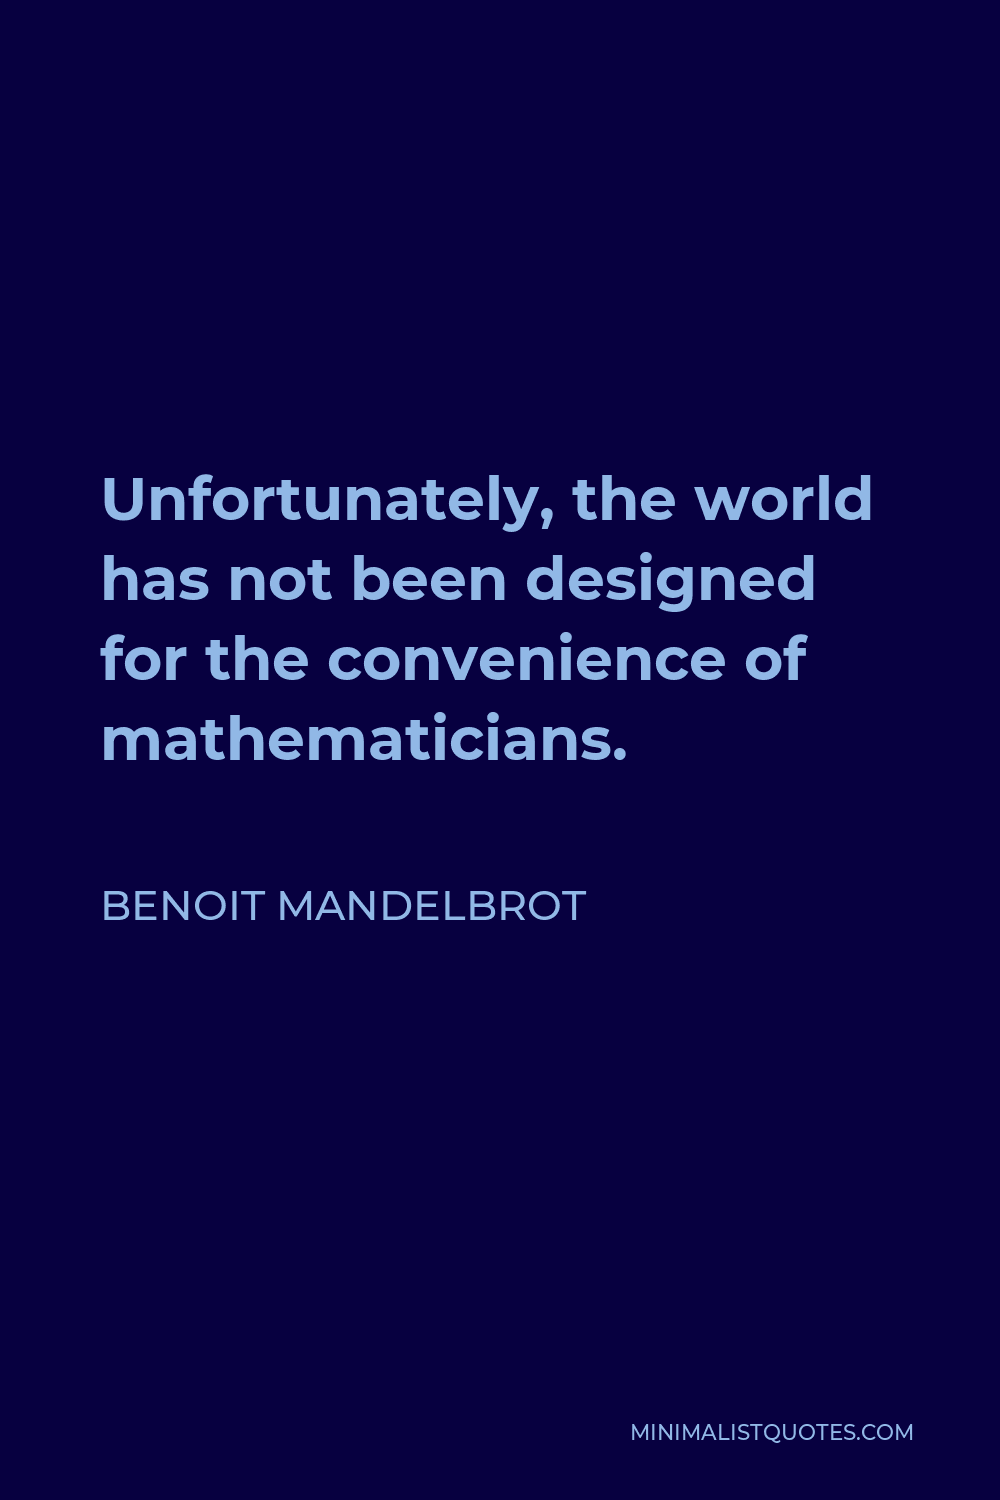 Benoit Mandelbrot Quote - Unfortunately, the world has not been designed for the convenience of mathematicians.